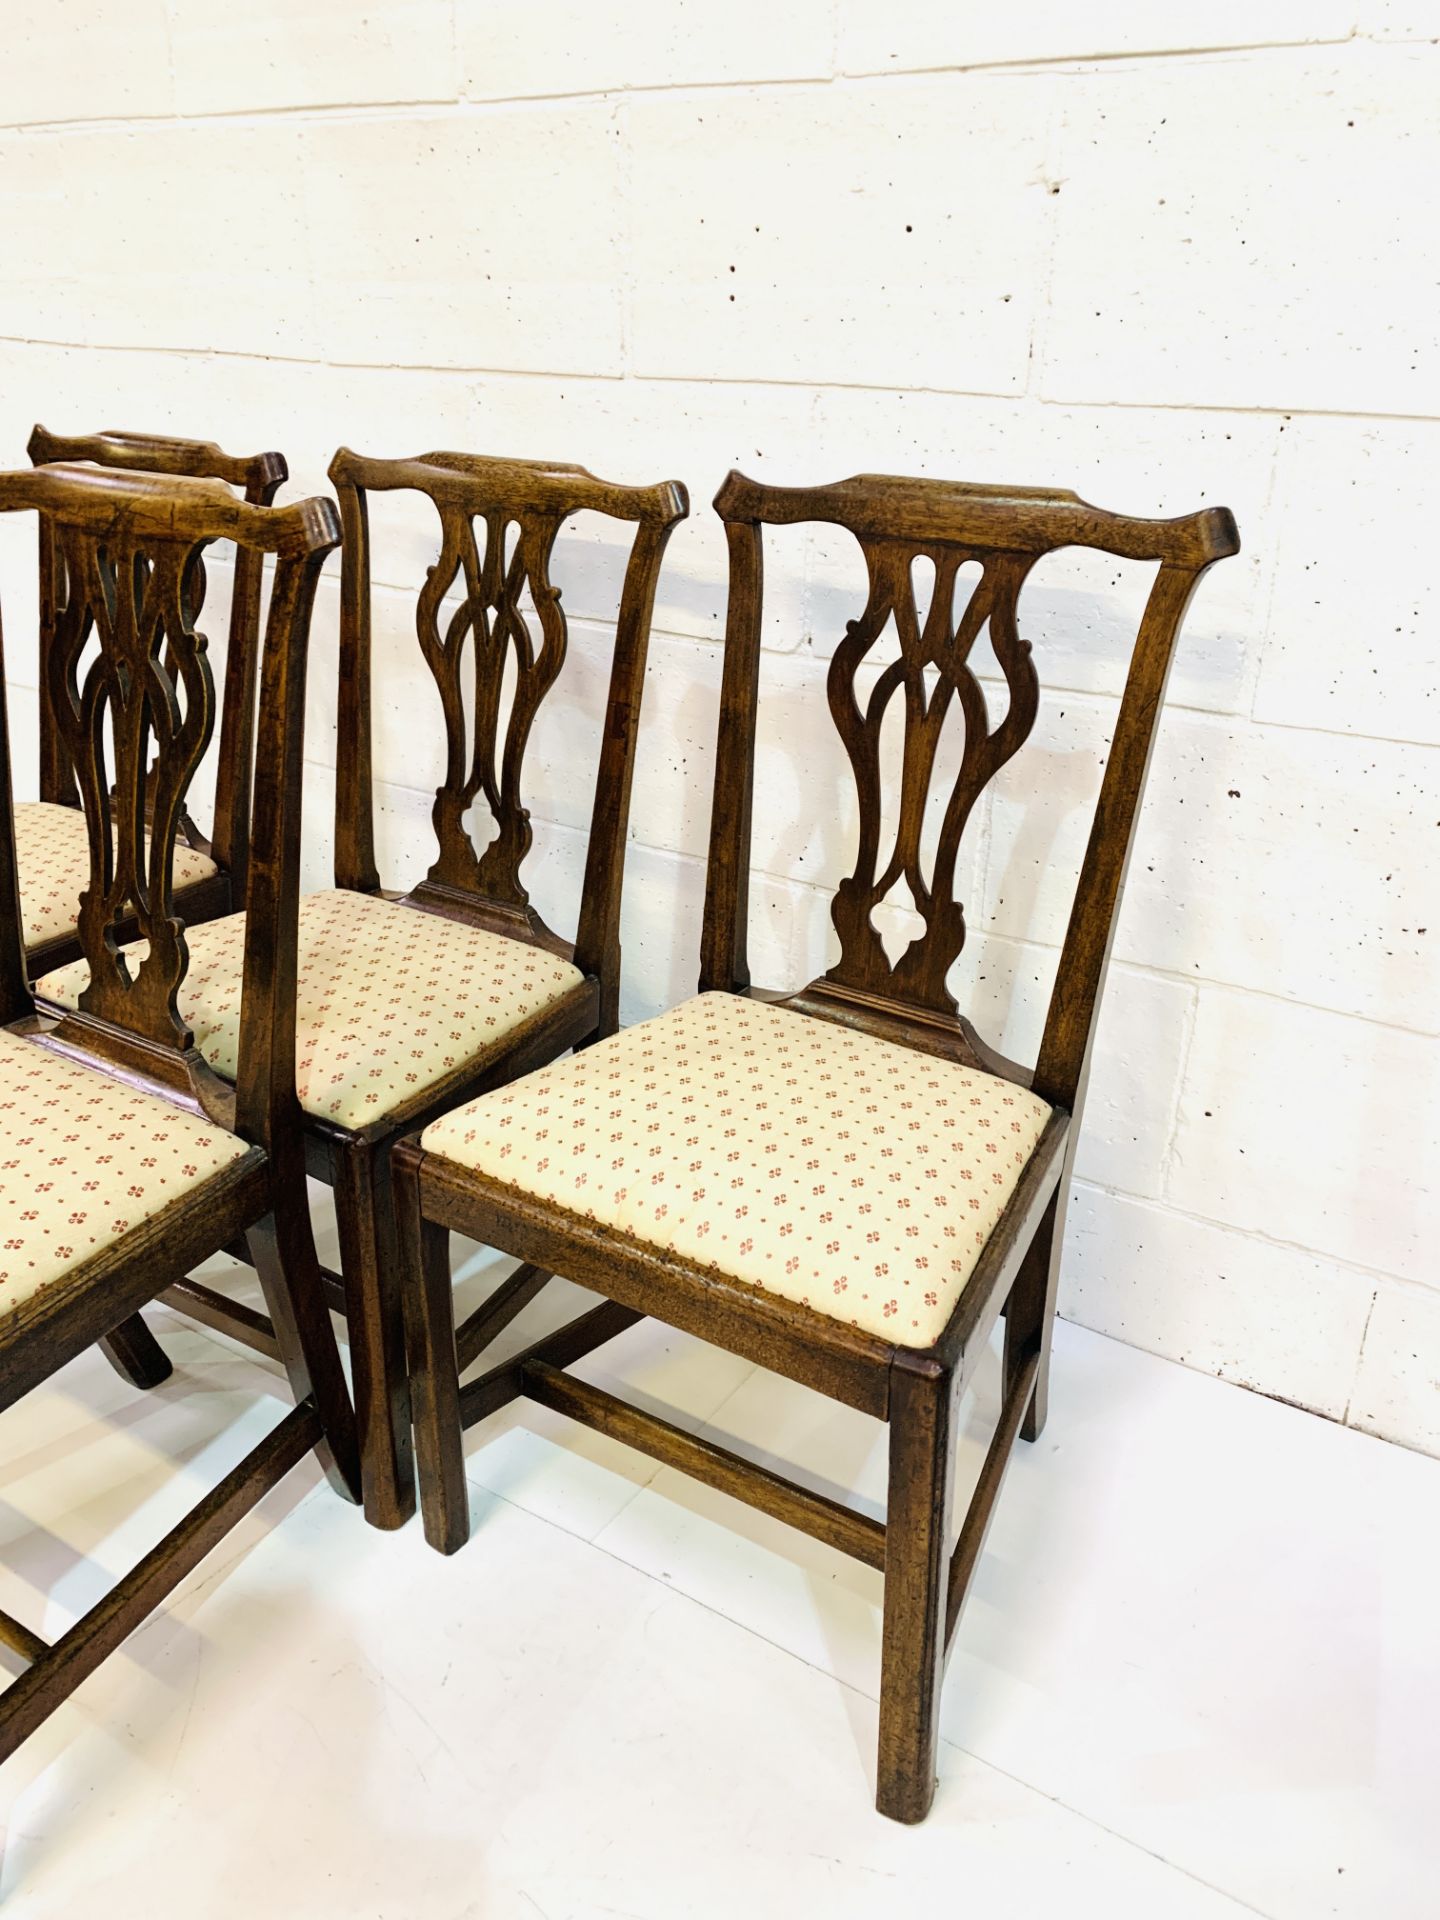 Group of four 19th Century mahogany framed Chippendale style chairs - Image 3 of 5